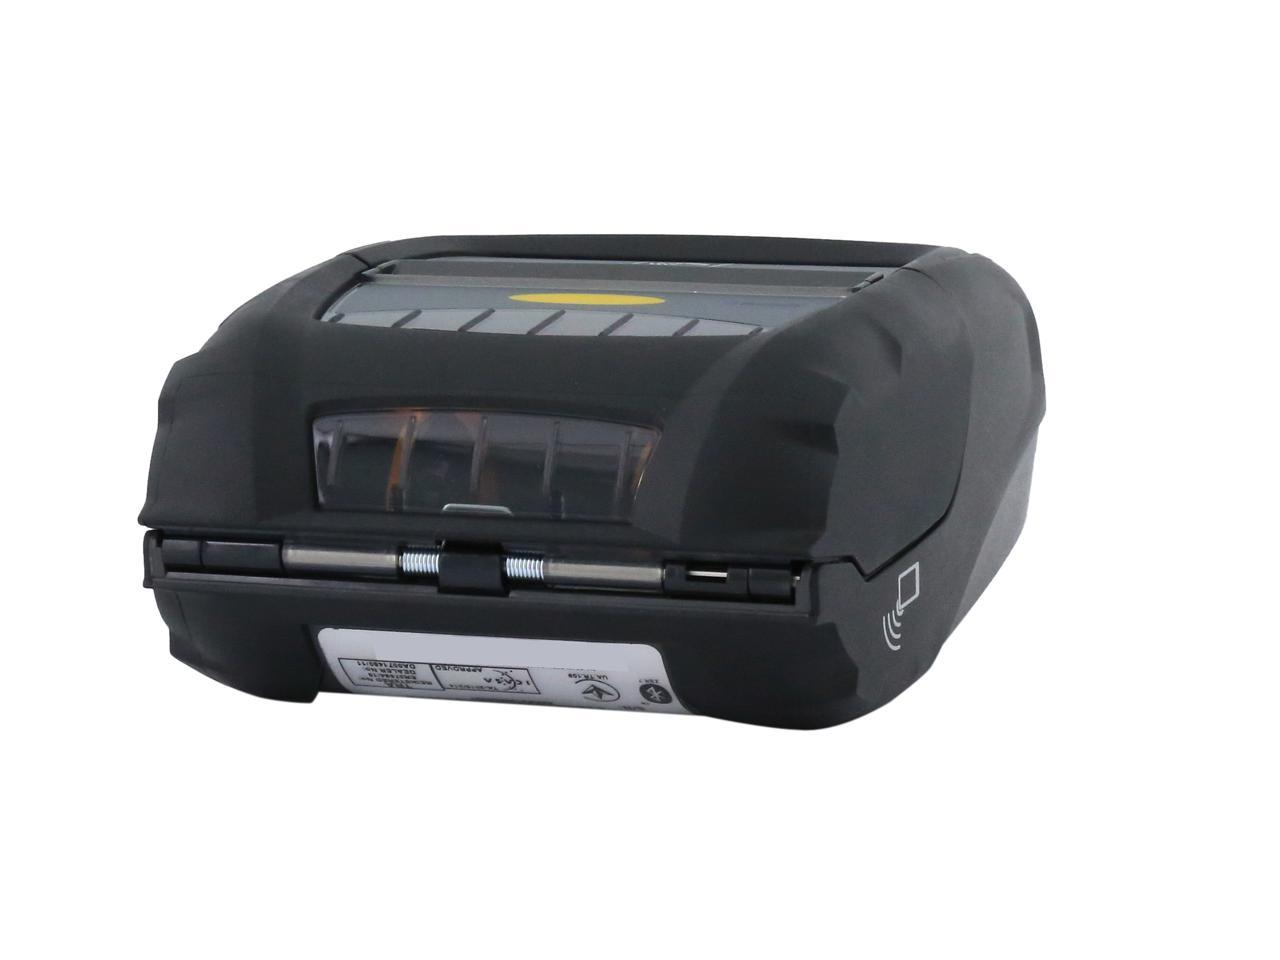 Zebra Zq510 3 Mobile Direct Thermal Receipt And Label Printer 203 Dpi Bluetooth 40 Linered 3893